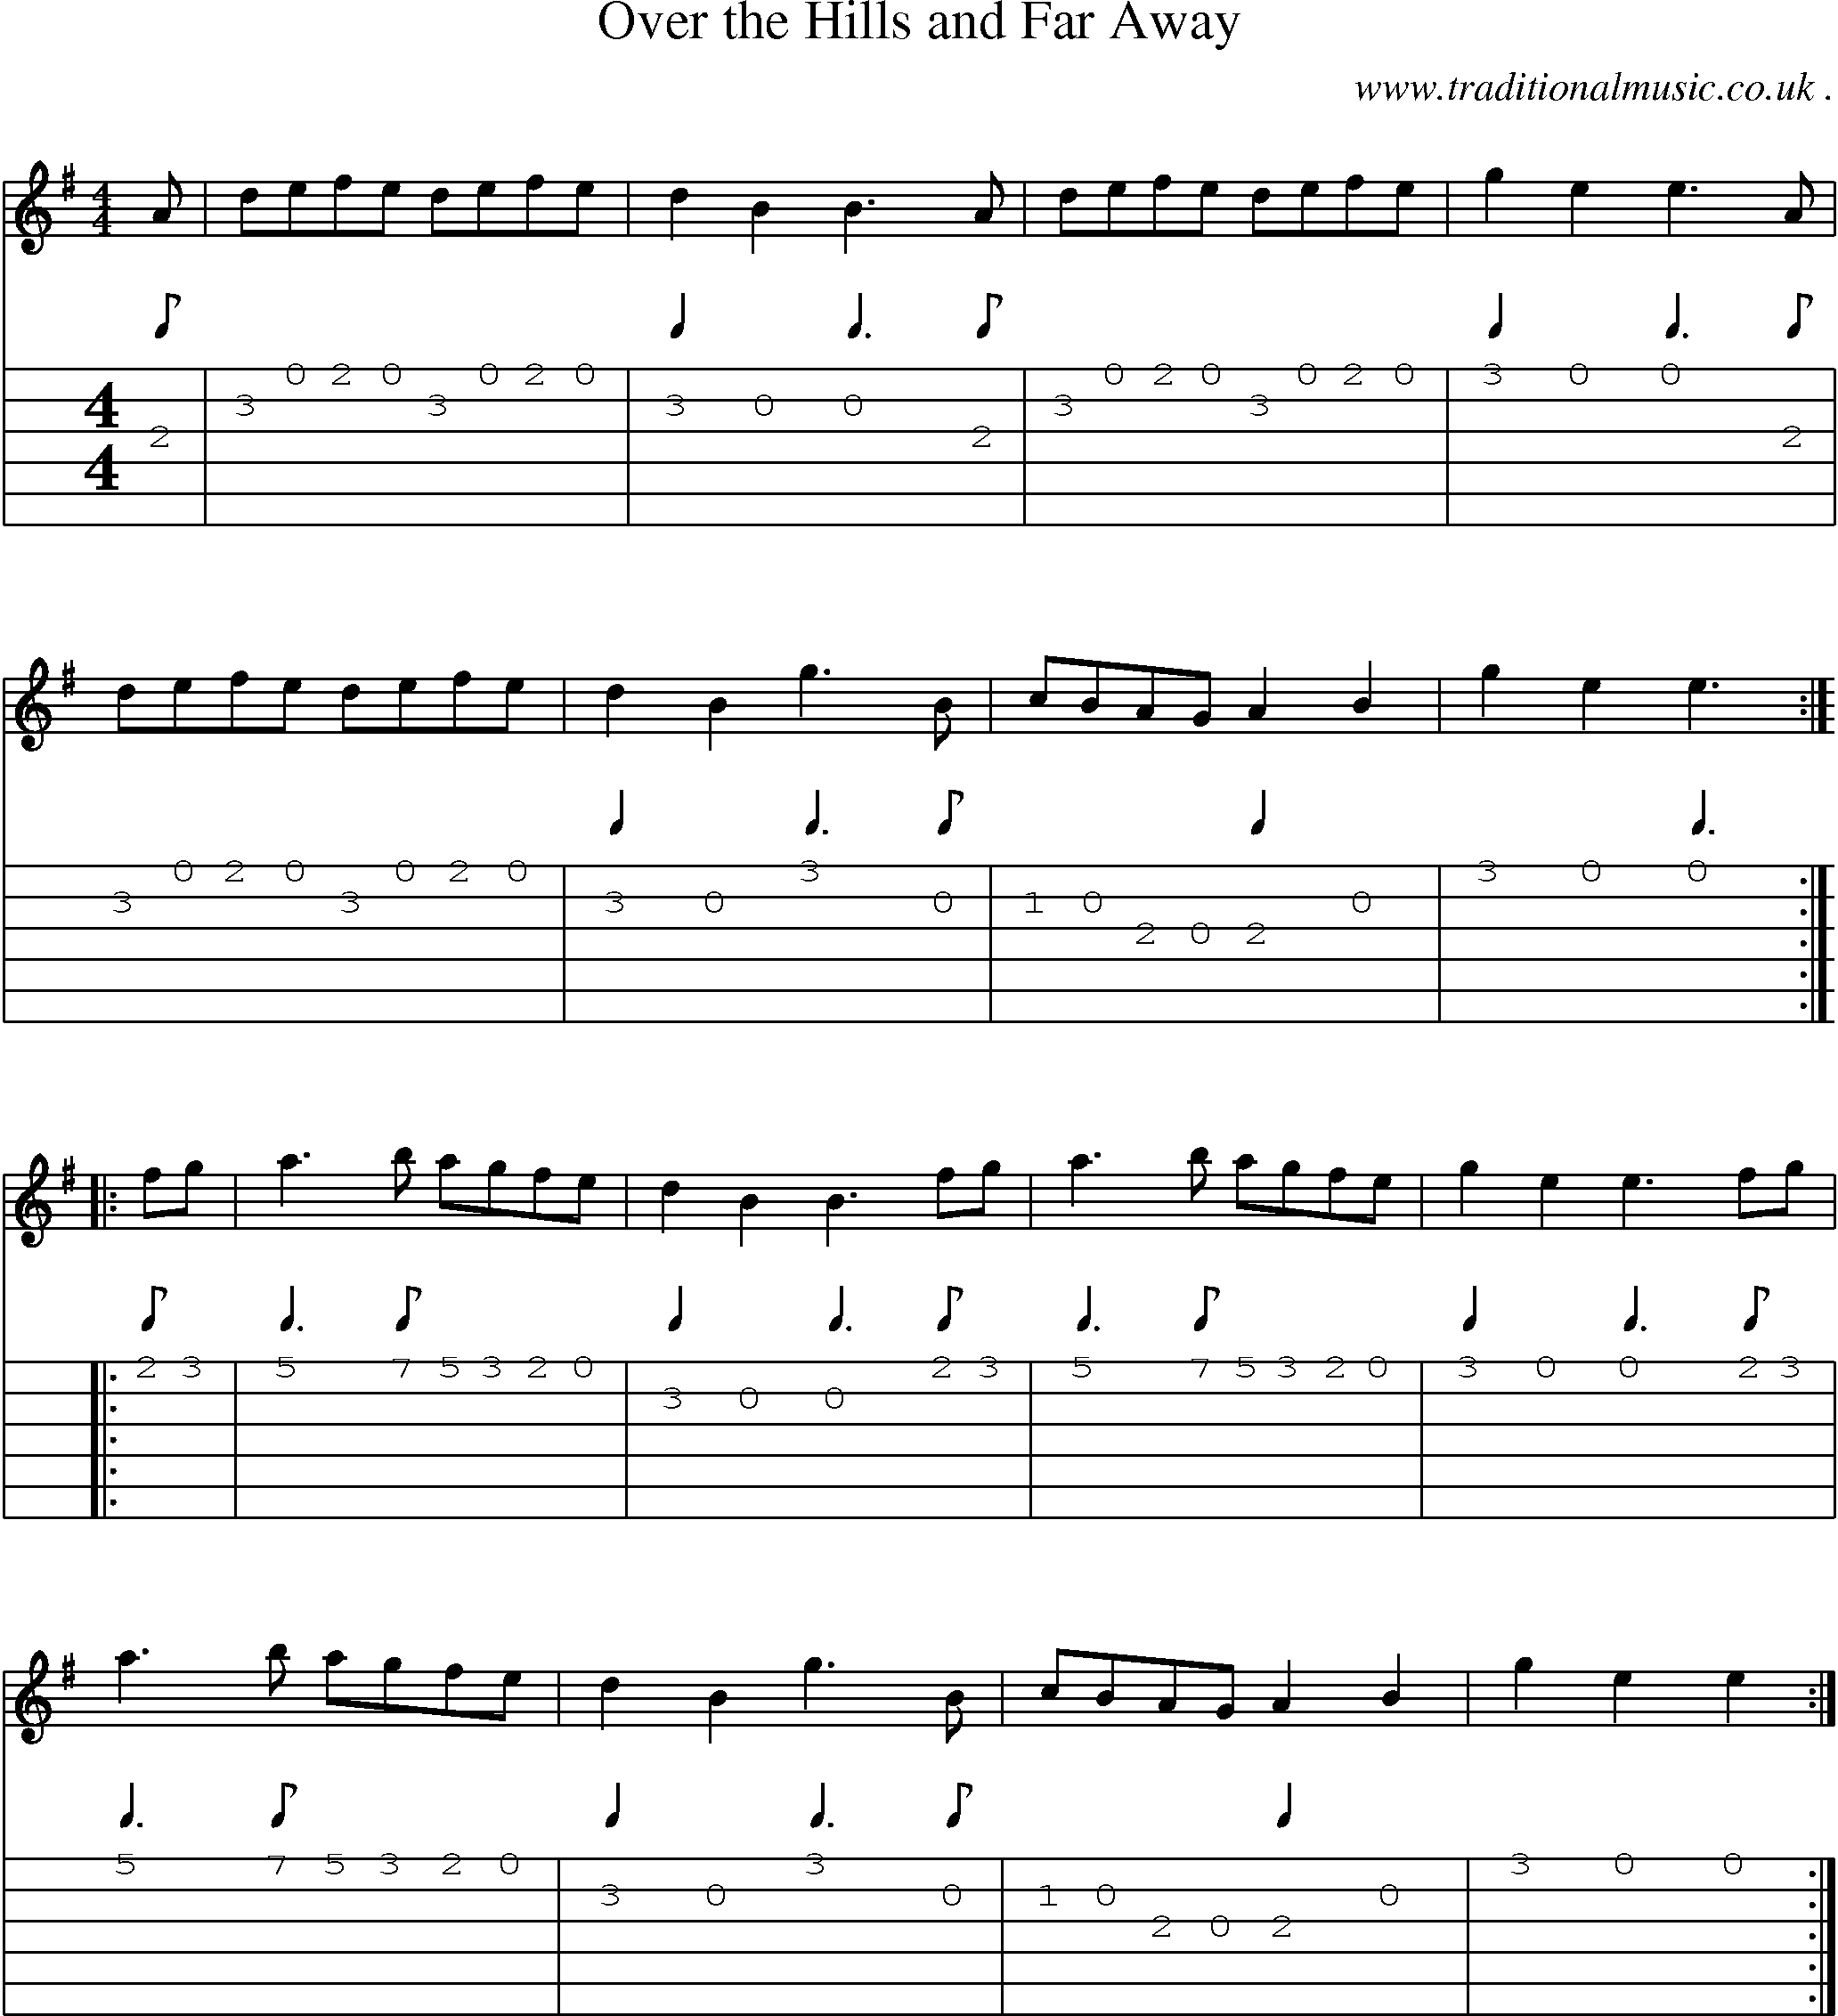 Sheet-Music and Guitar Tabs for Over The Hills And Far Away